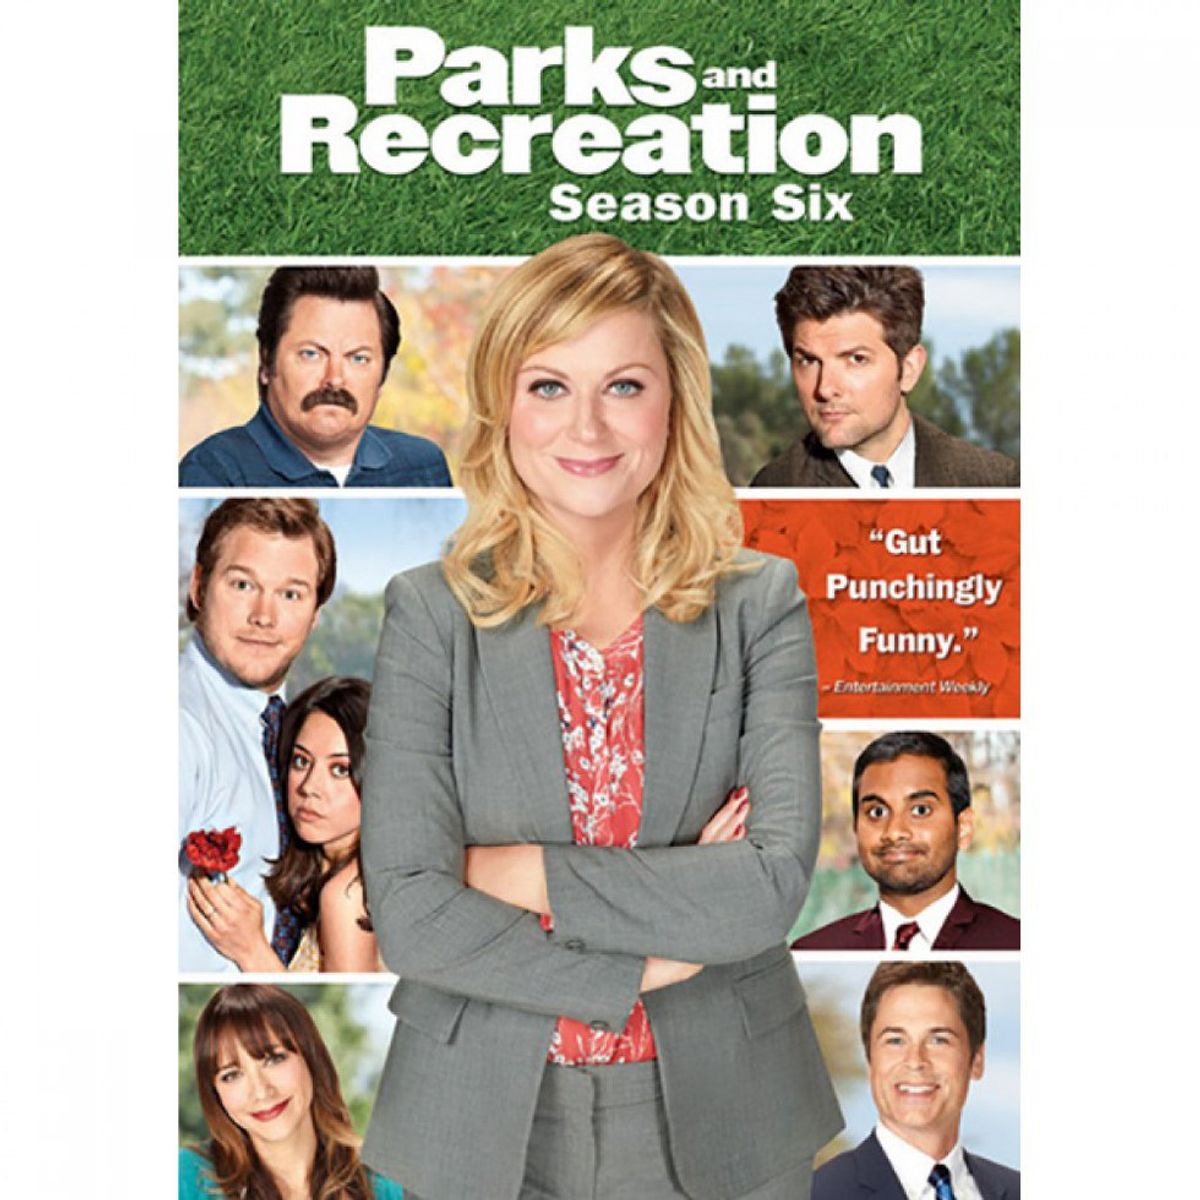 Registering For Classes As Told By Parks And Recreation